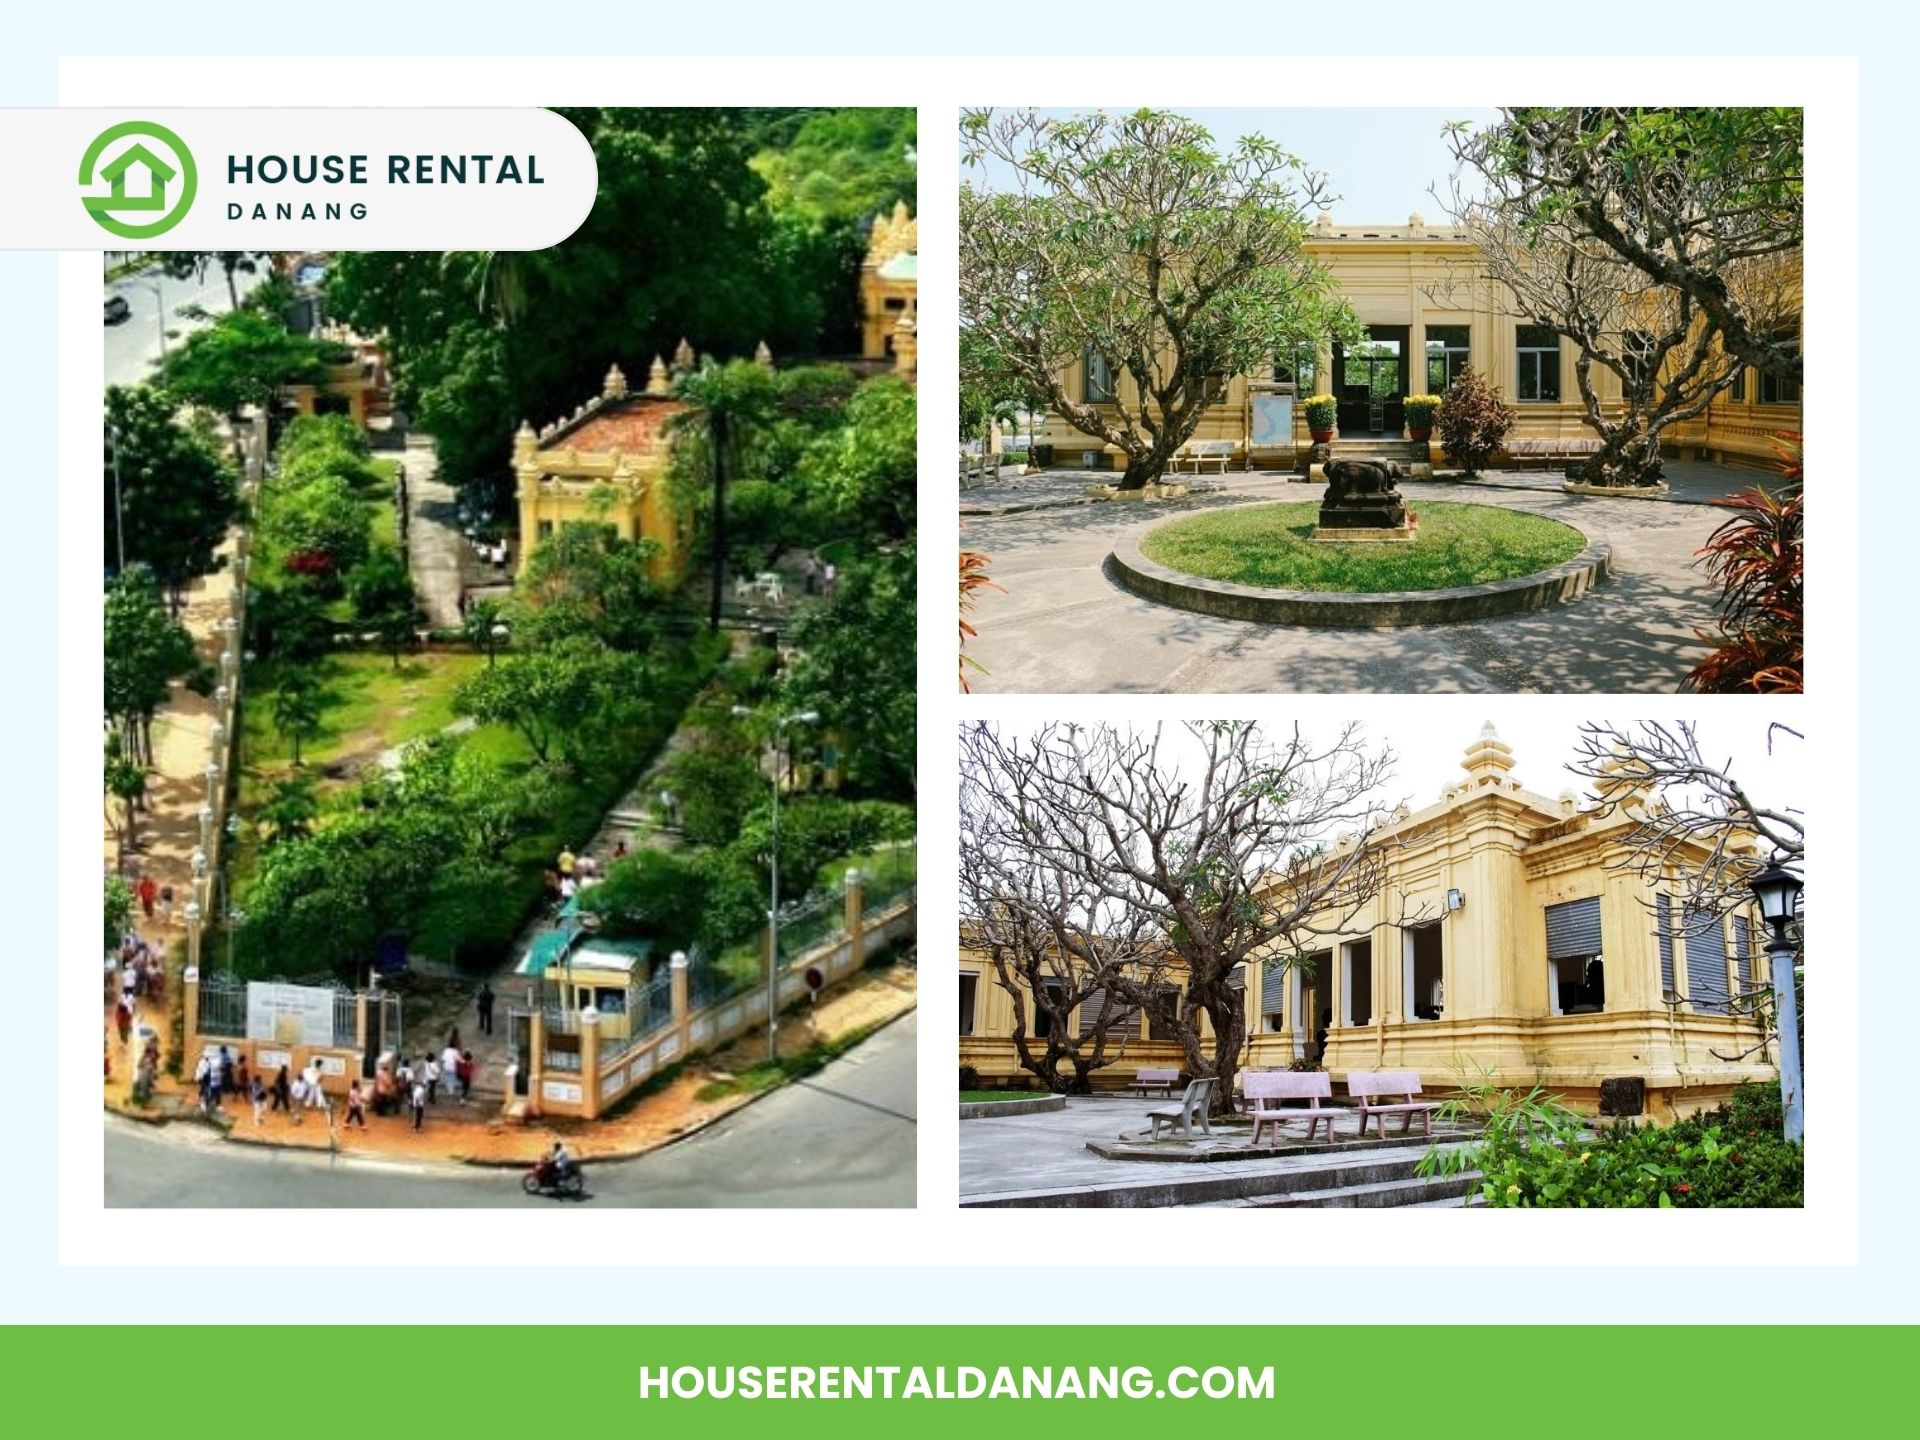 Collage of historic yellow buildings with arched windows surrounded by gardens and trees in Danang, Vietnam, featuring the logo and website for House Rental Danang. Nearby, explore the Museum of Cham Sculpture in Da Nang for a blend of culture and history.